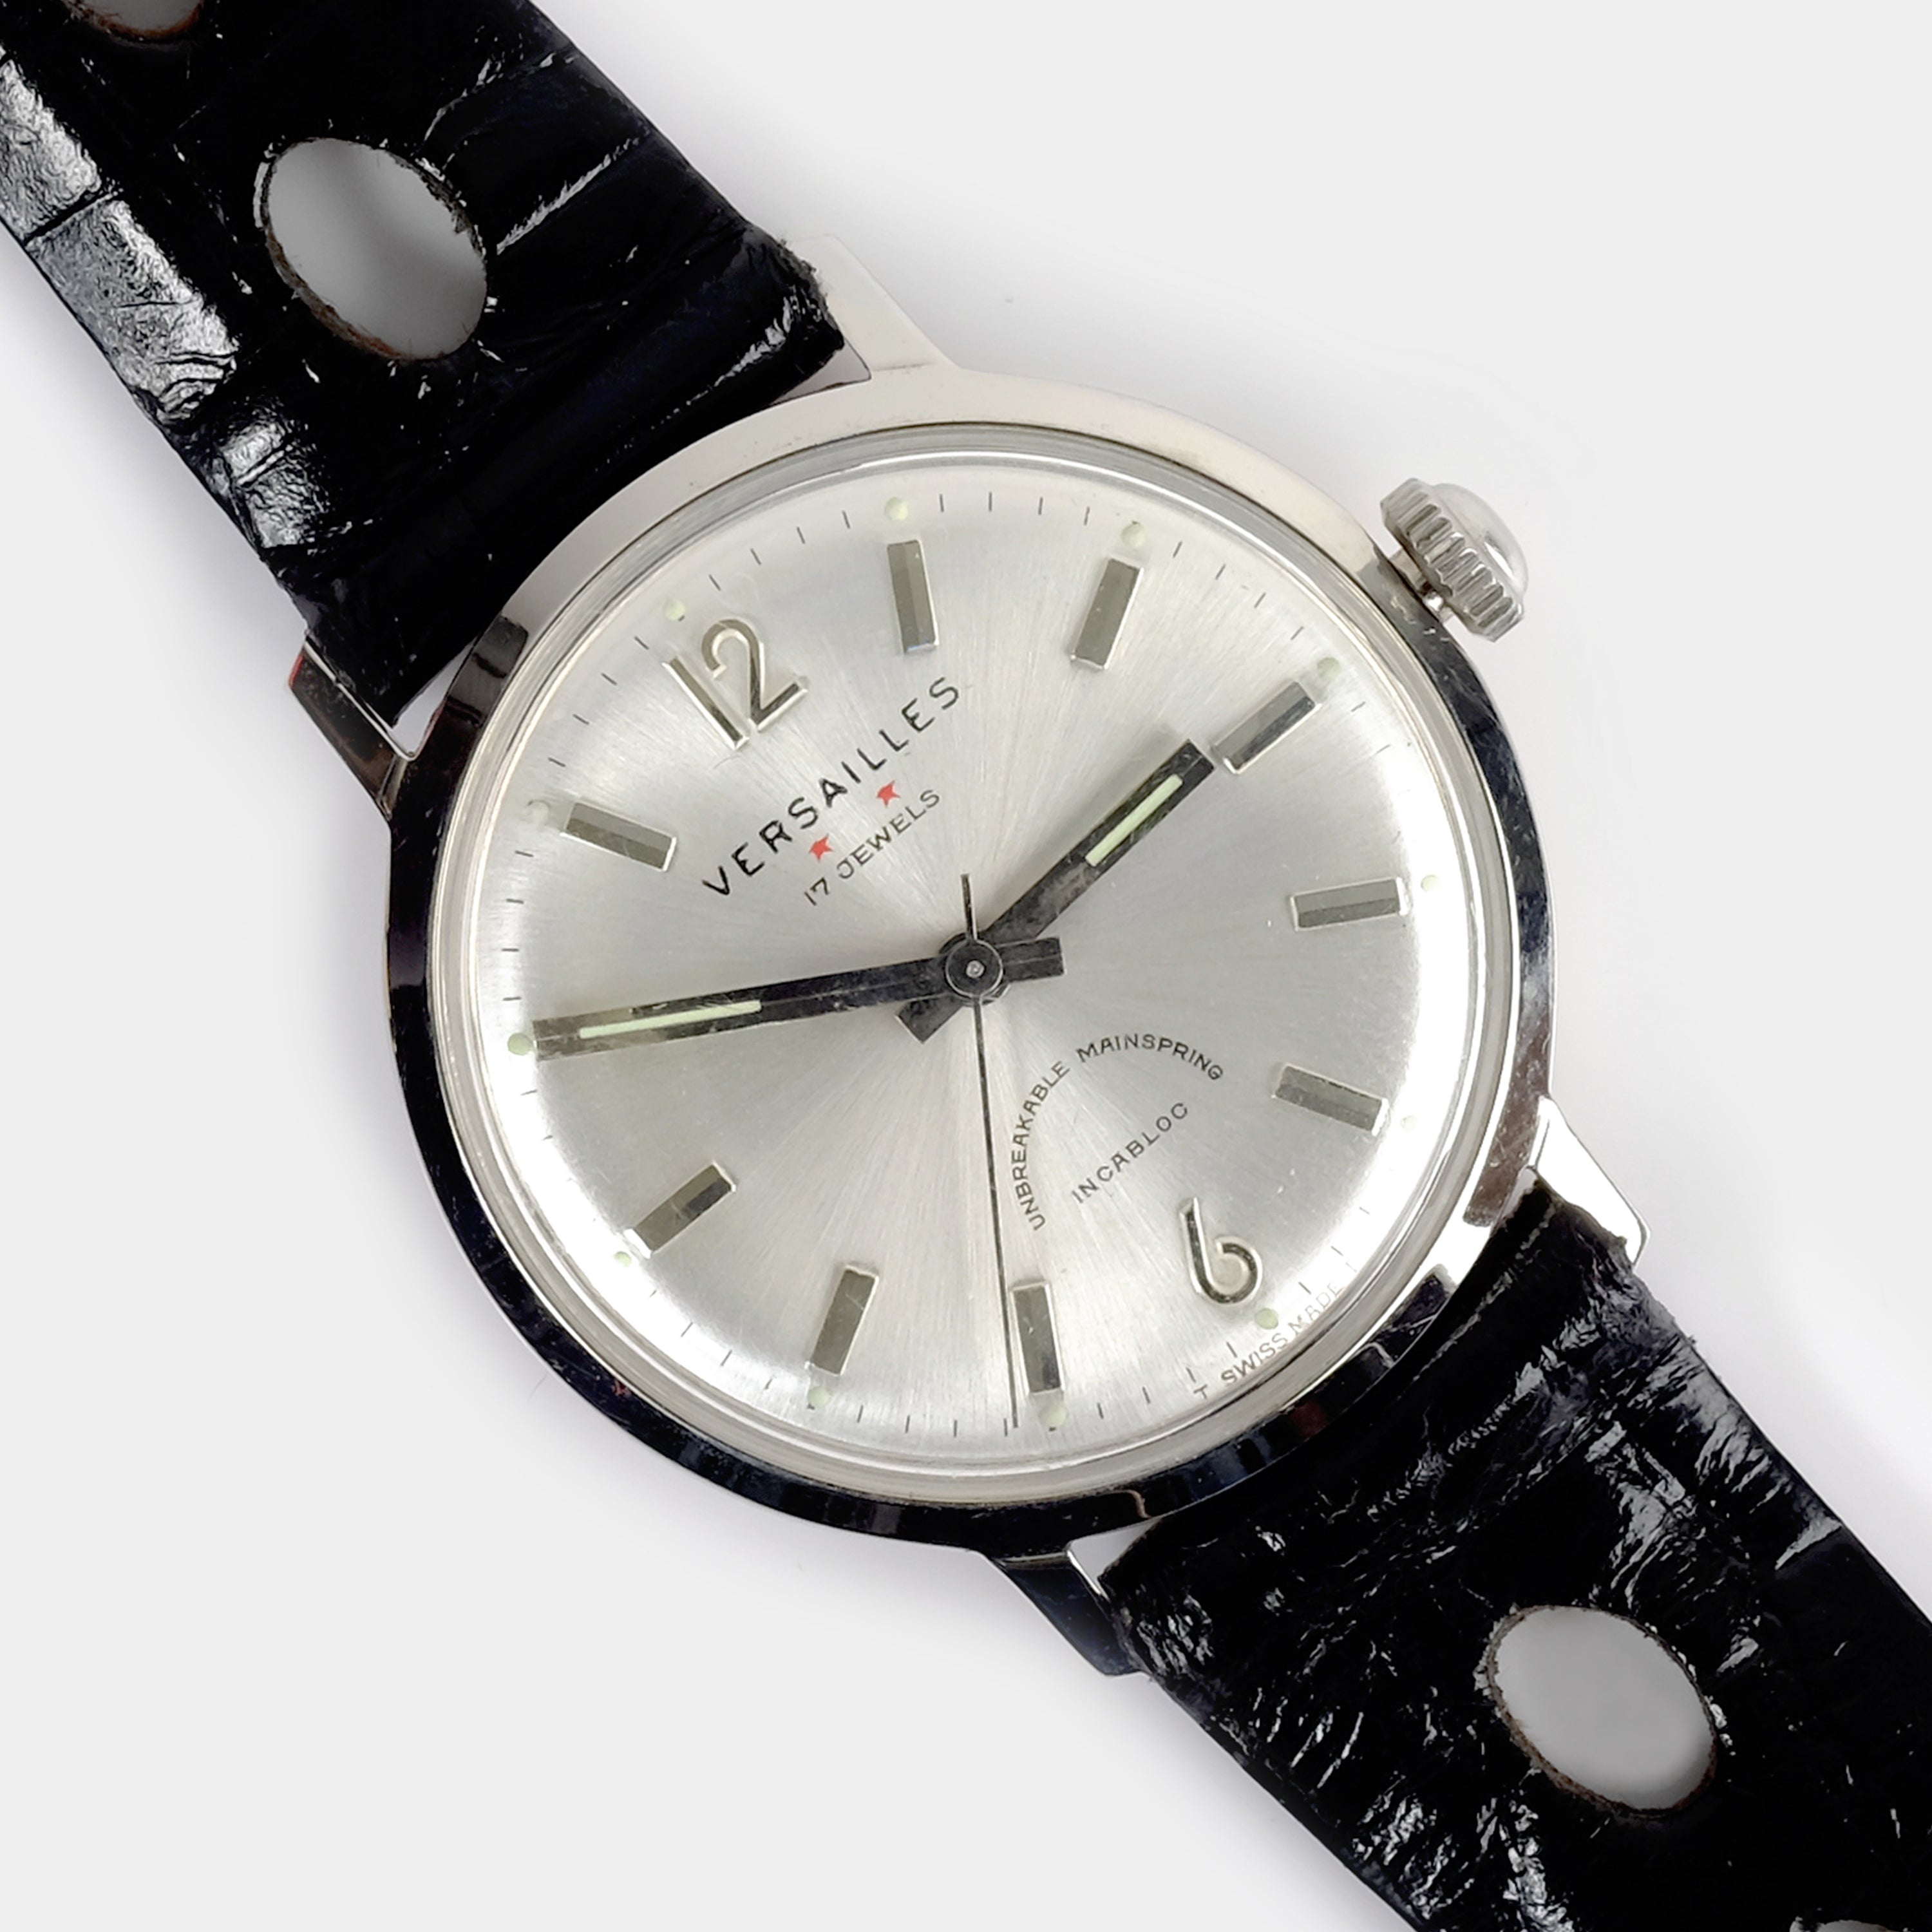 Versailles Time-Only Manual-Wind Circa 1960s Wristwatch